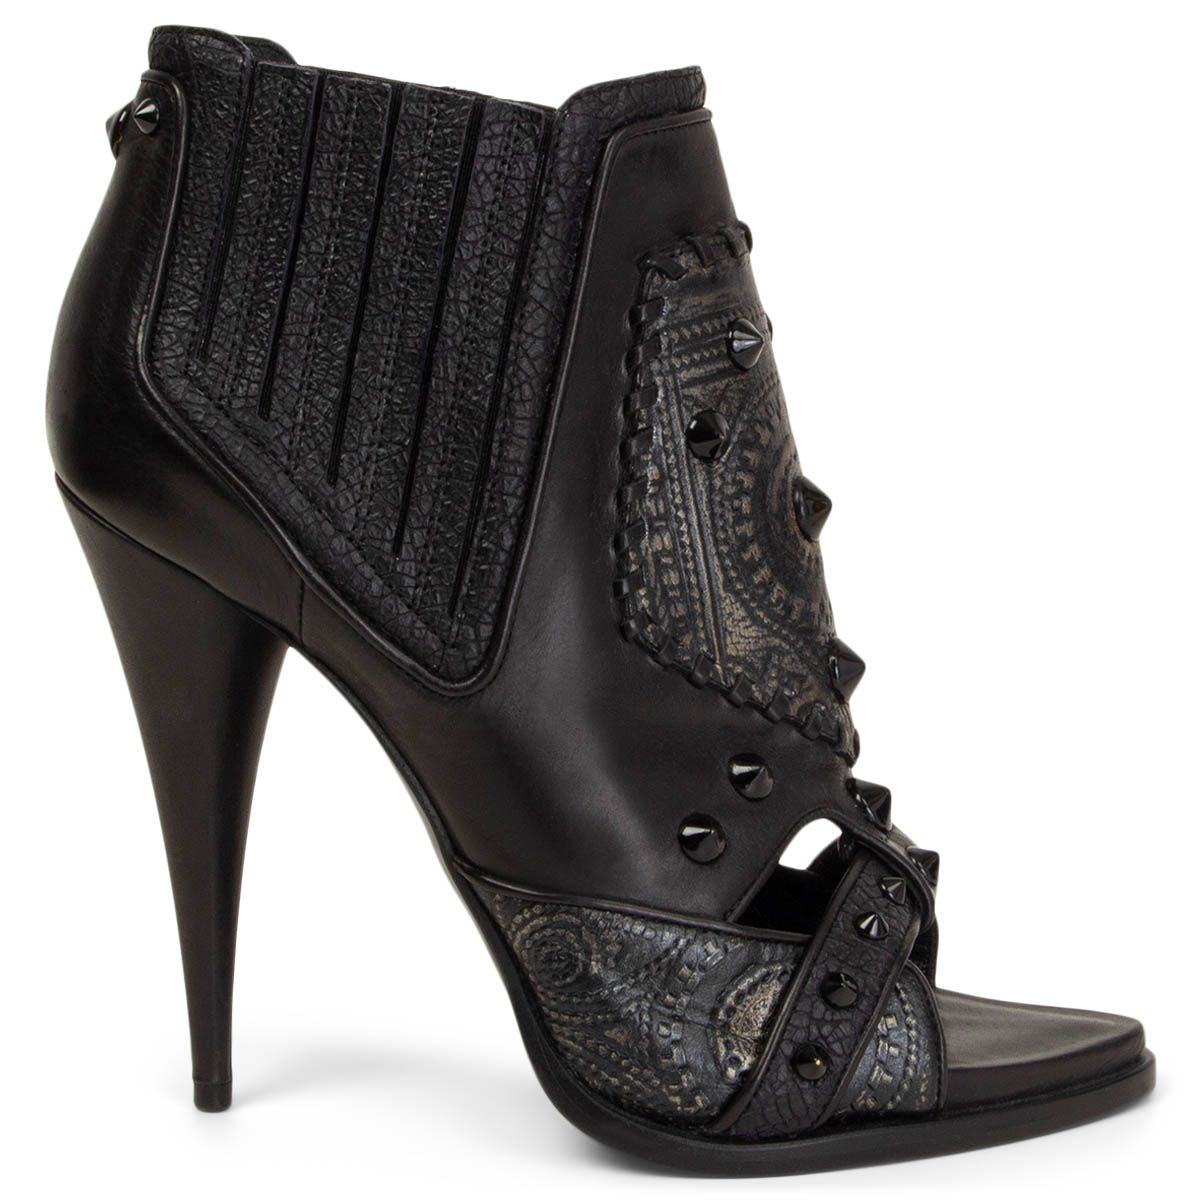 Givenchy Studded Ankle Booties Black Leather